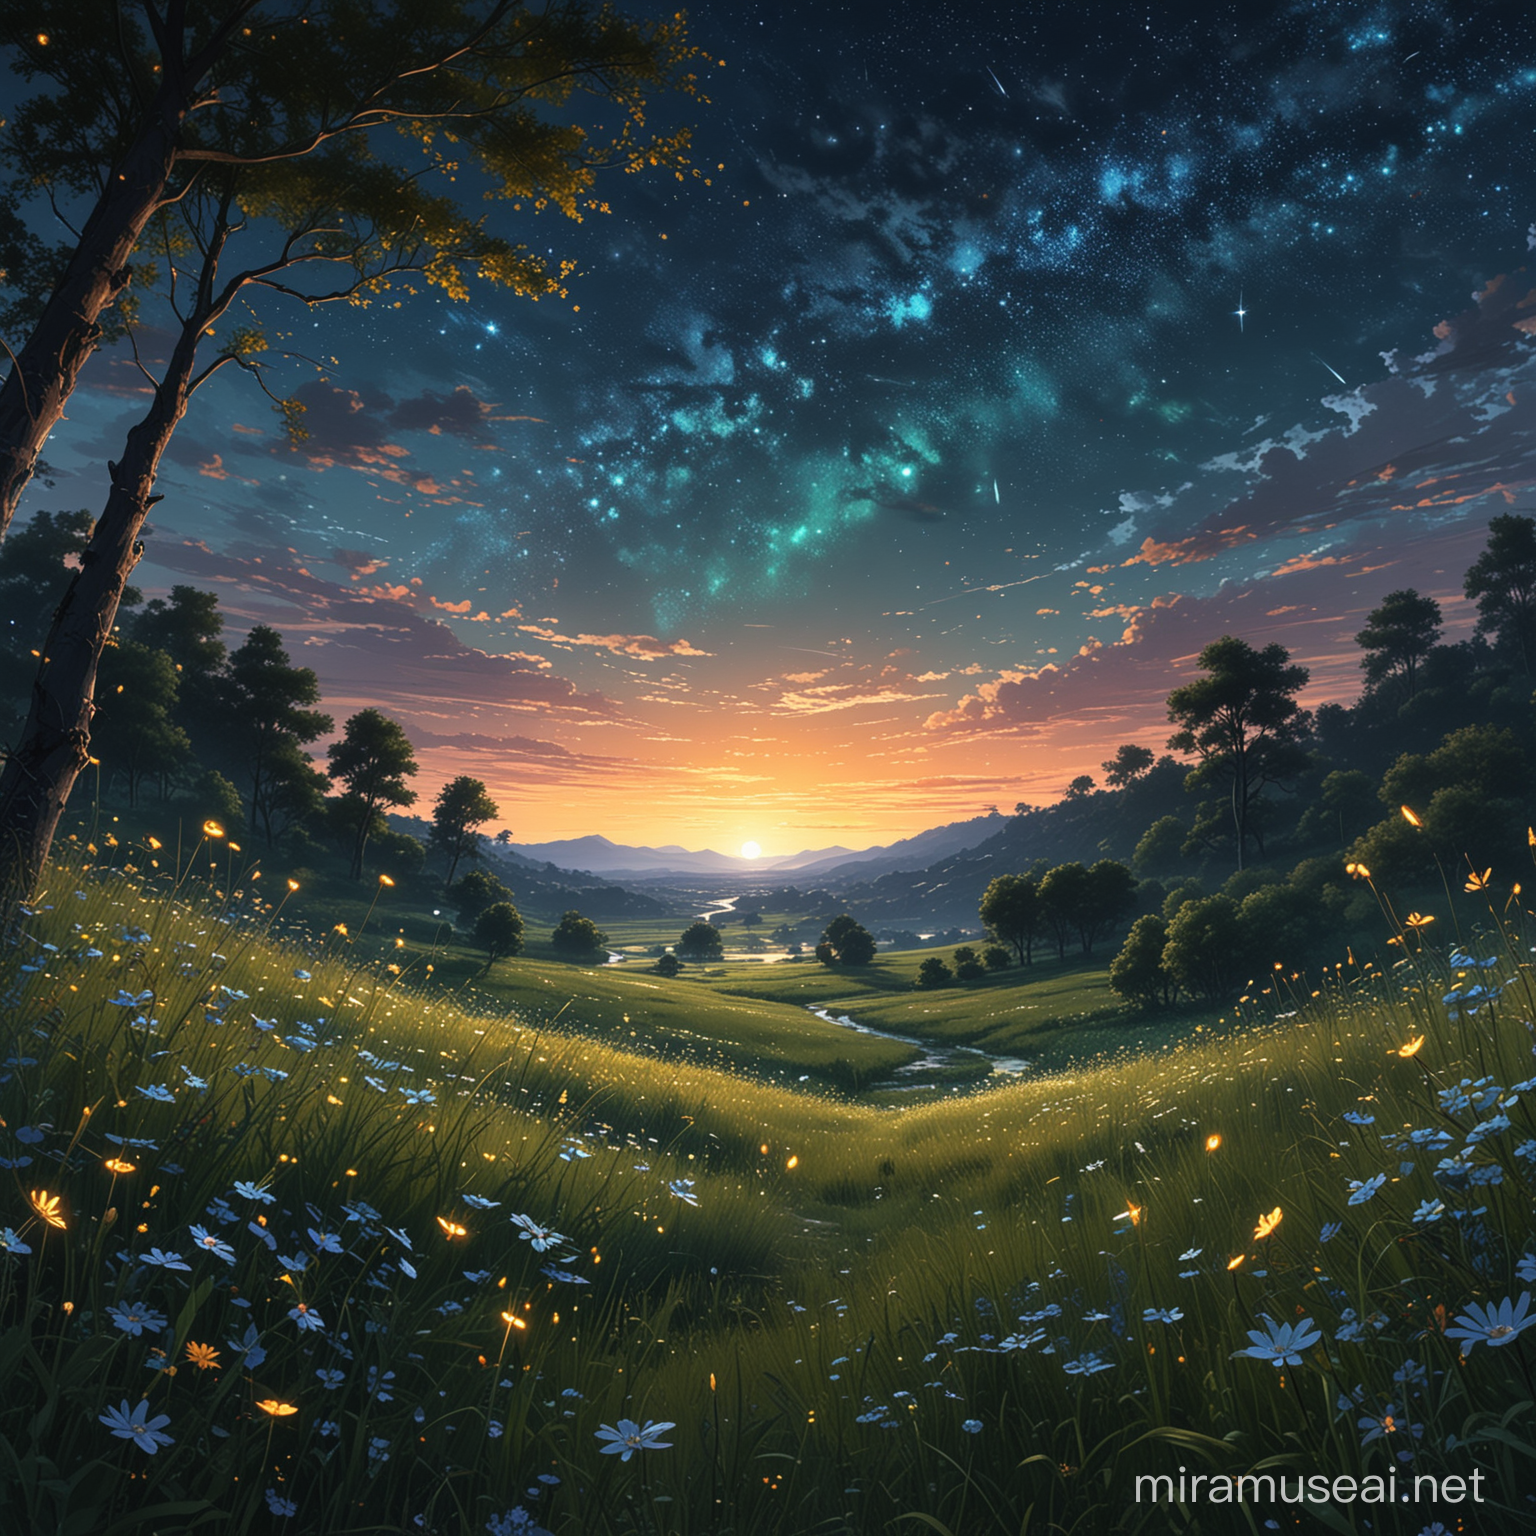 Mystical Night Sky with Fireflies and Vibrant Meadow Flowers